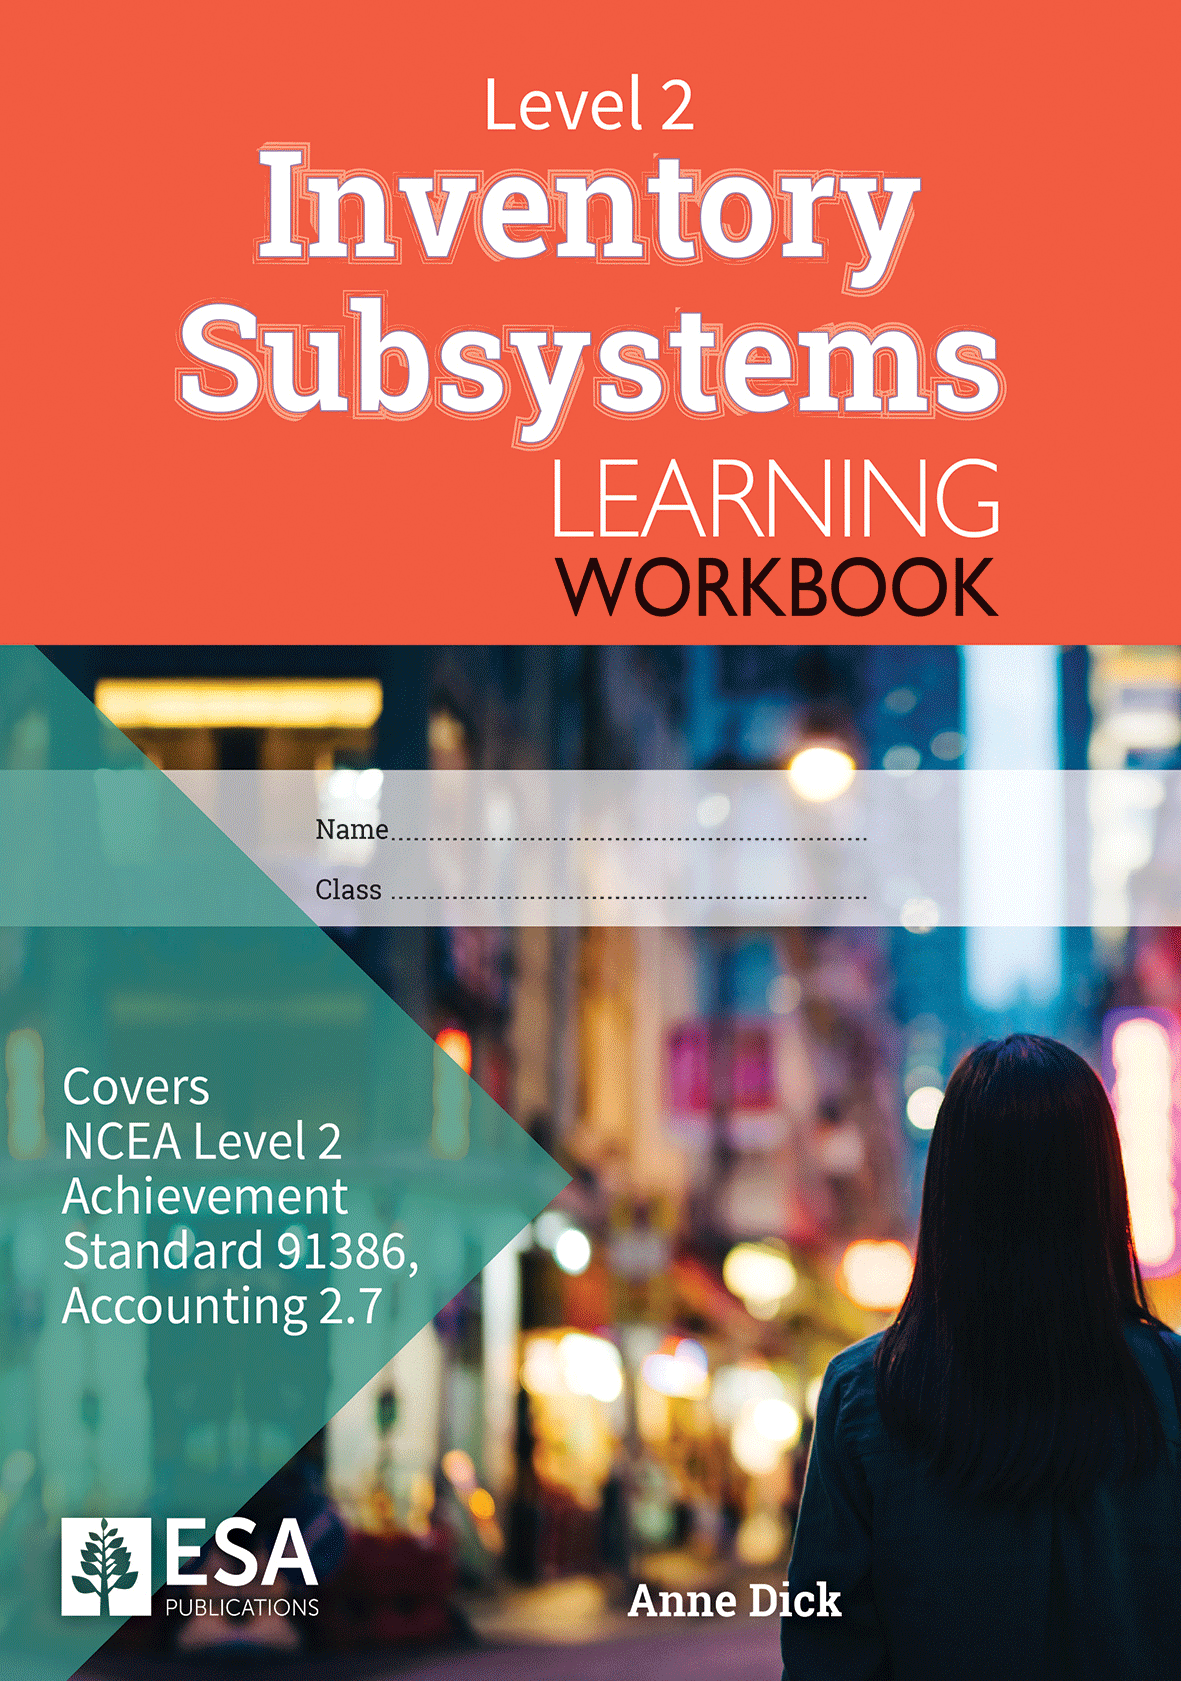 Level 2 Inventory Subsystems 2.7 Learning Workbook